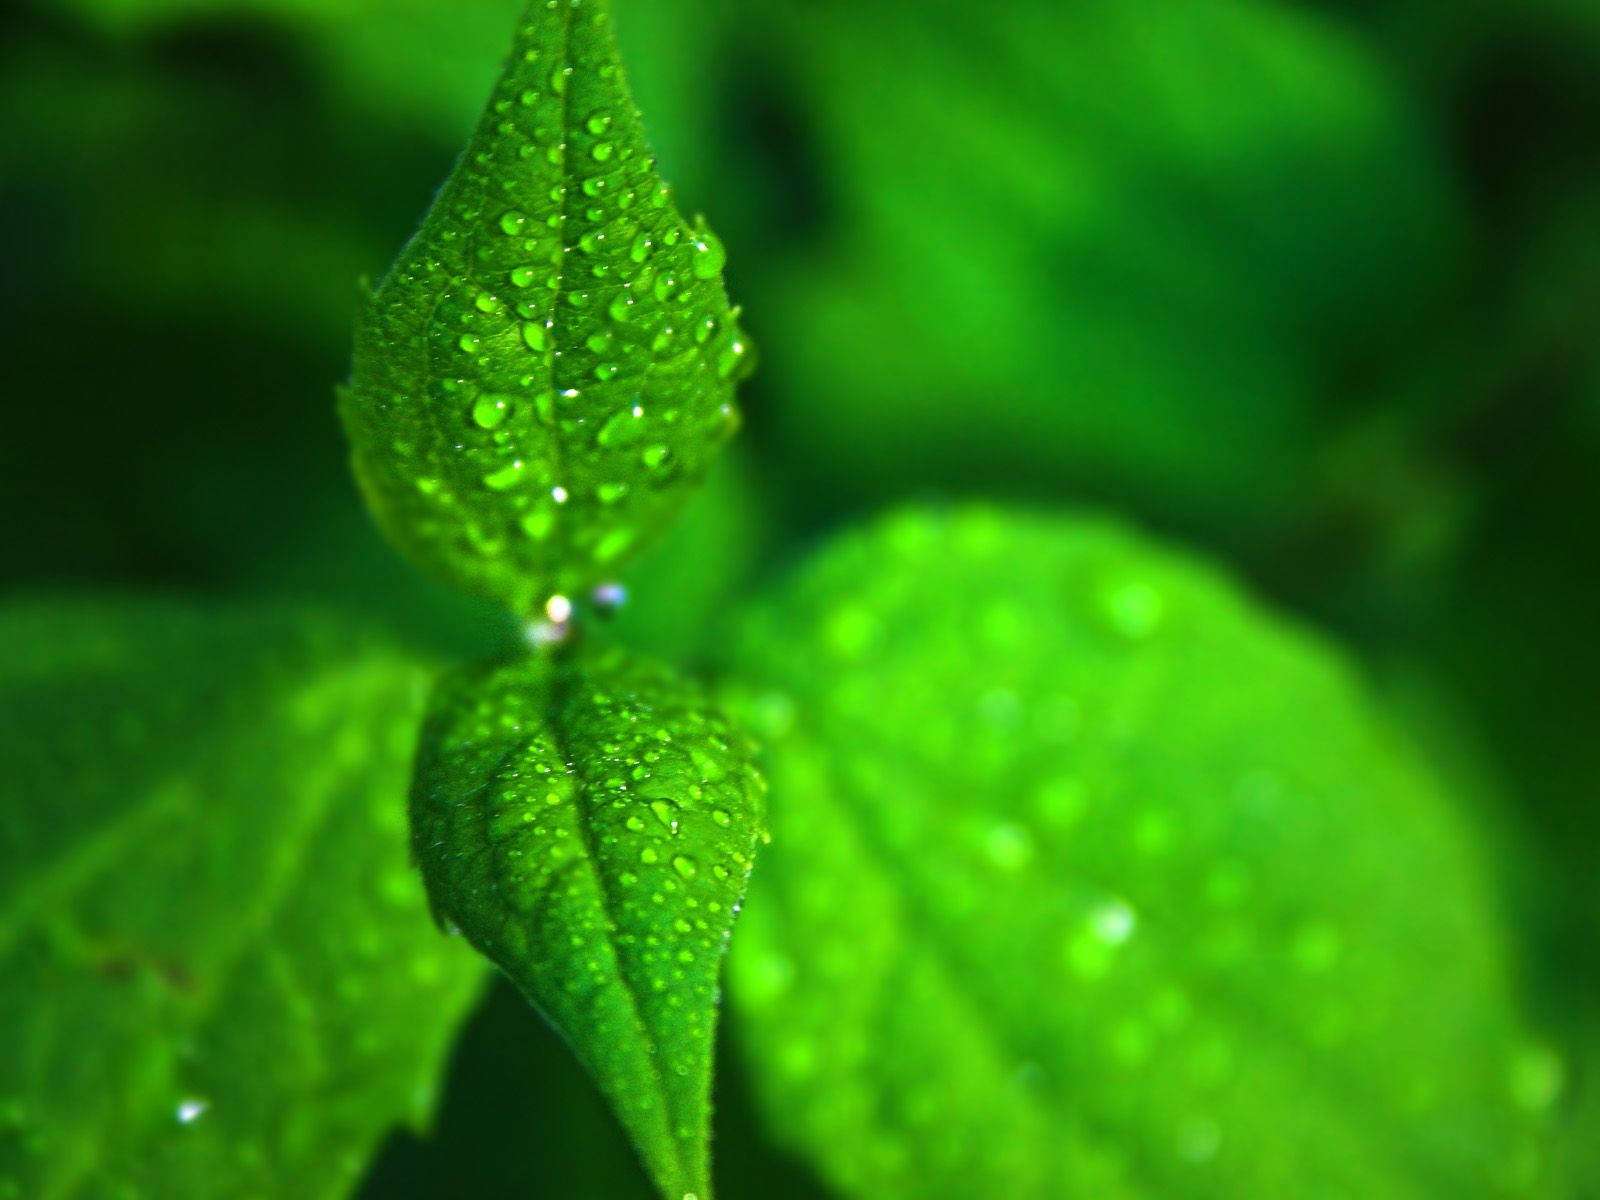 HD wallpaper green leafed plant Moroccan Mint Peppermint moroccan mint   Wallpaper Flare